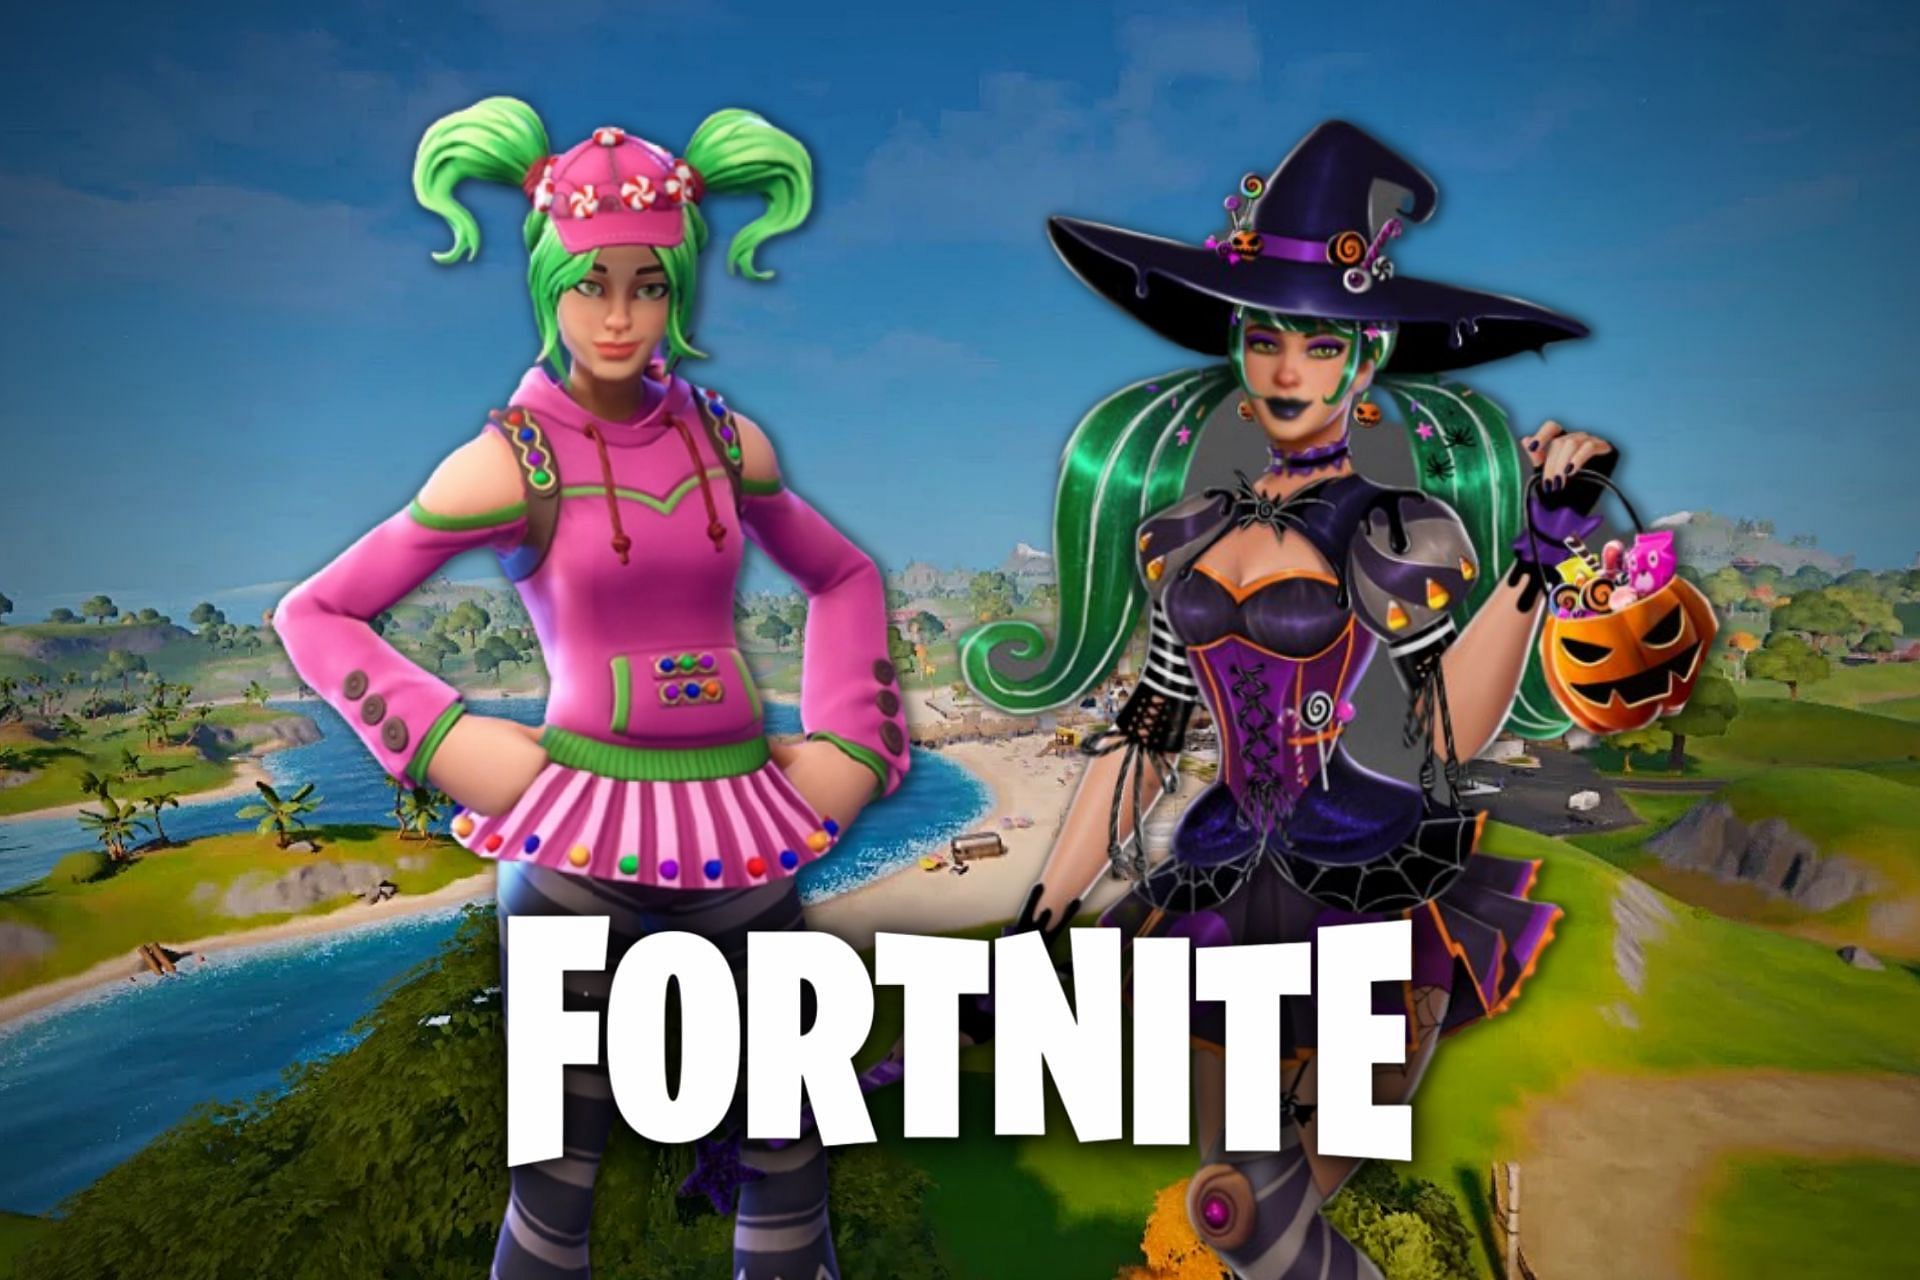 Zoey and Halloween Zoey outfits in Fortnite (Image via Sportskeeda)